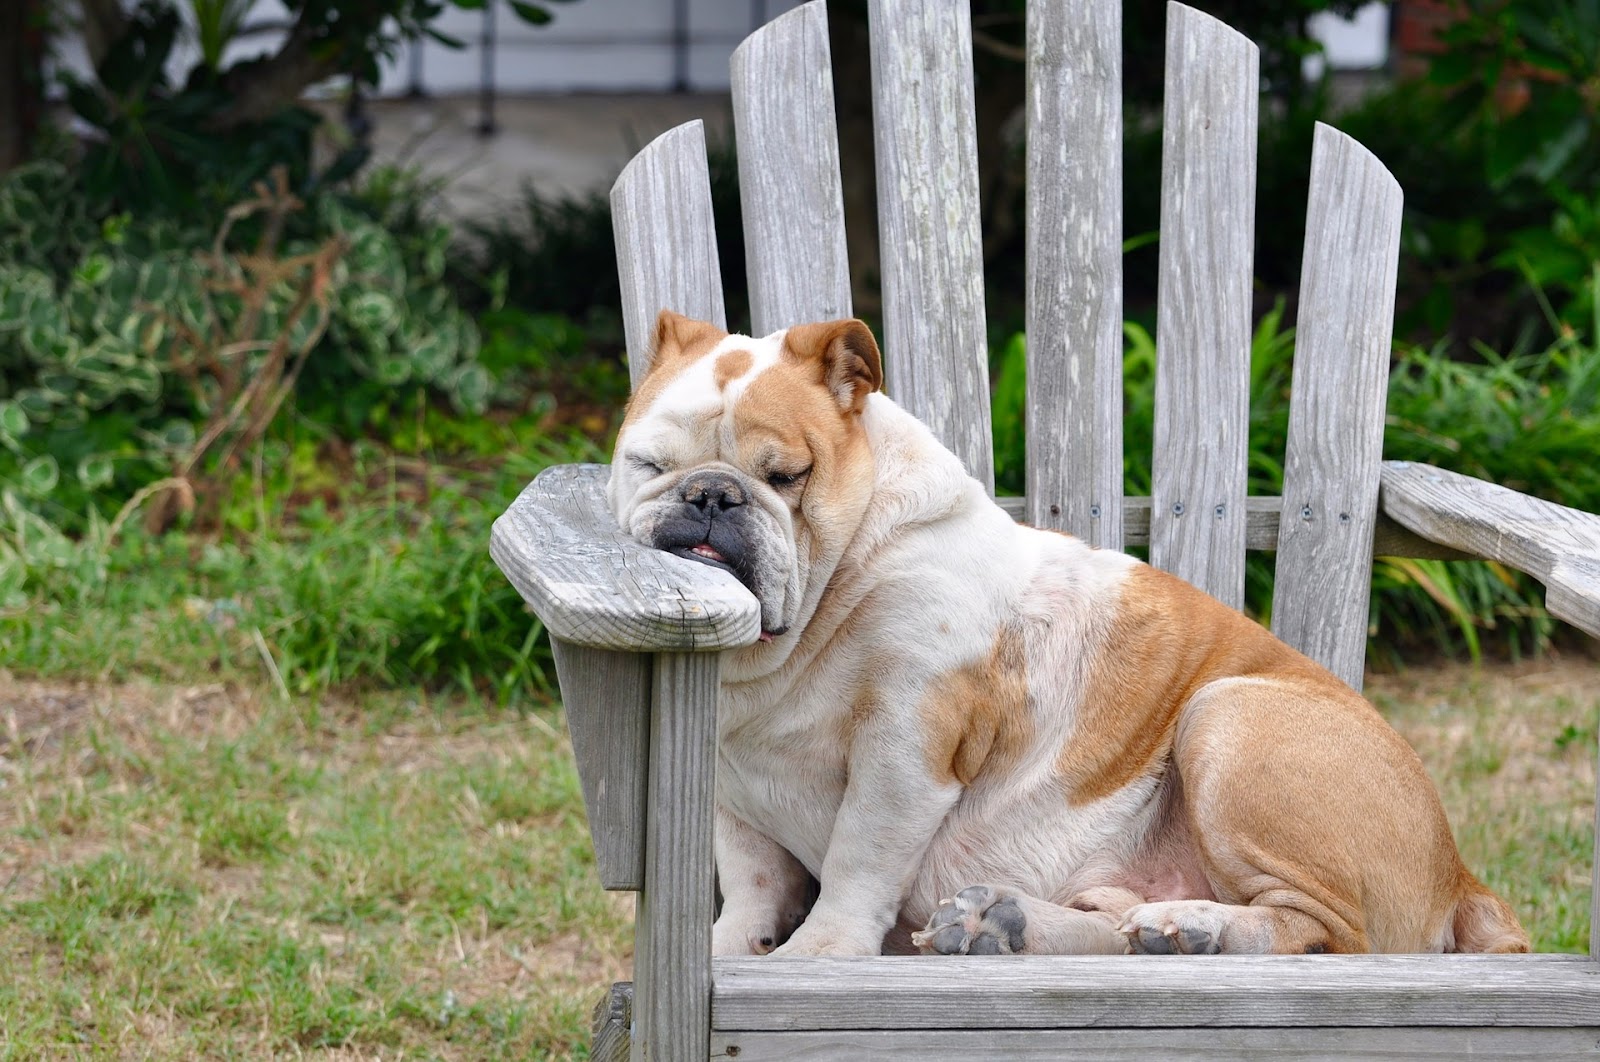 Dog napping in Adirondack chair